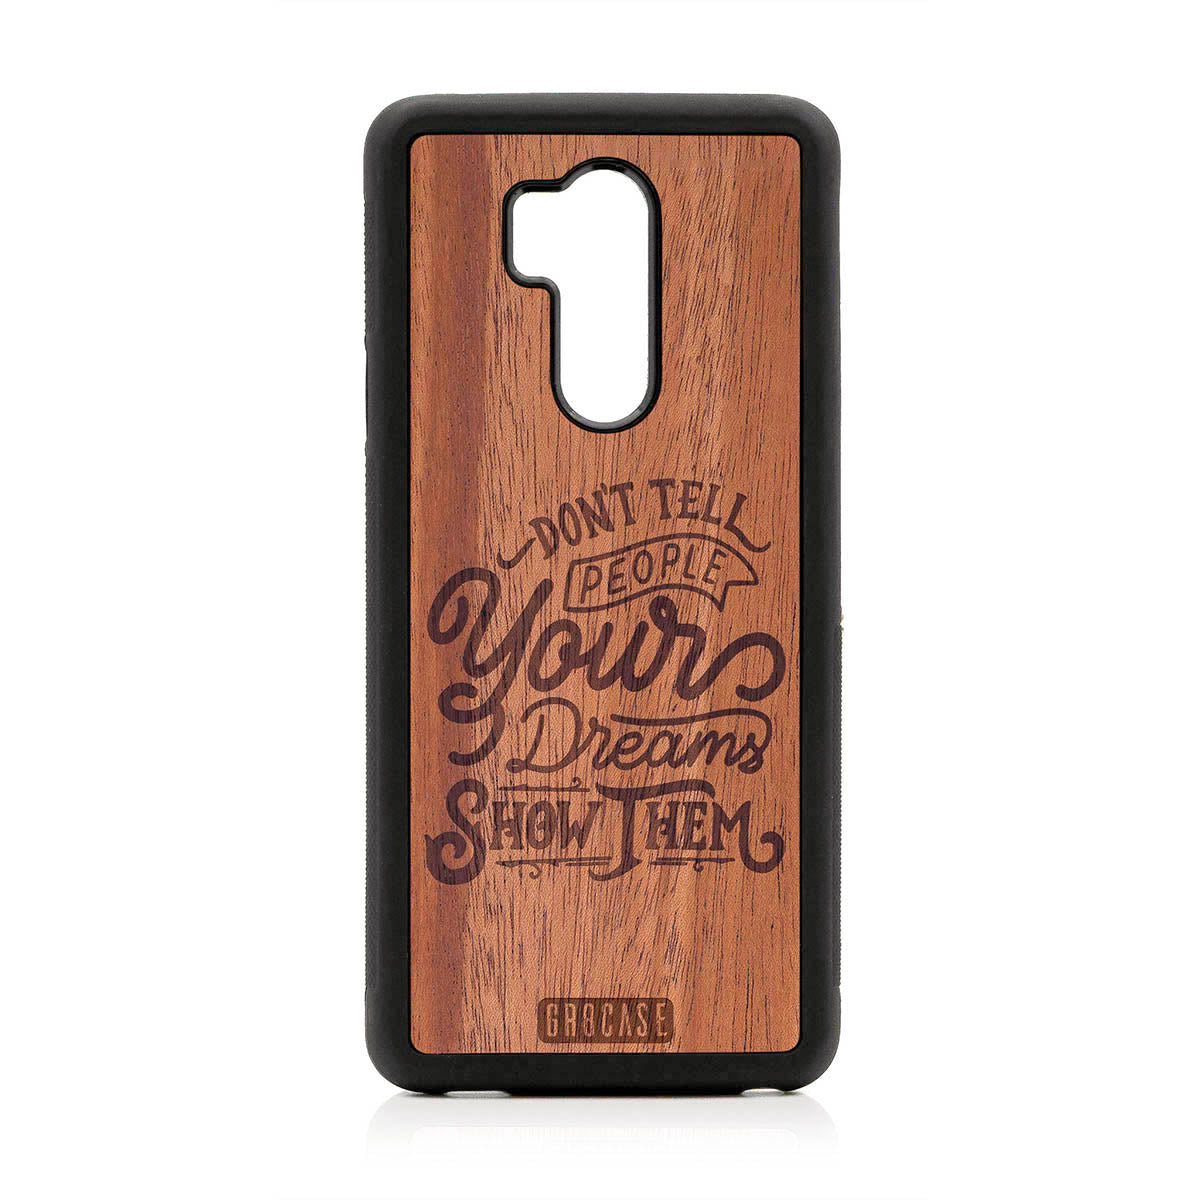 Don't Tell People Your Dreams Show Them Design Wood Case For LG G7 ThinQ by GR8CASE